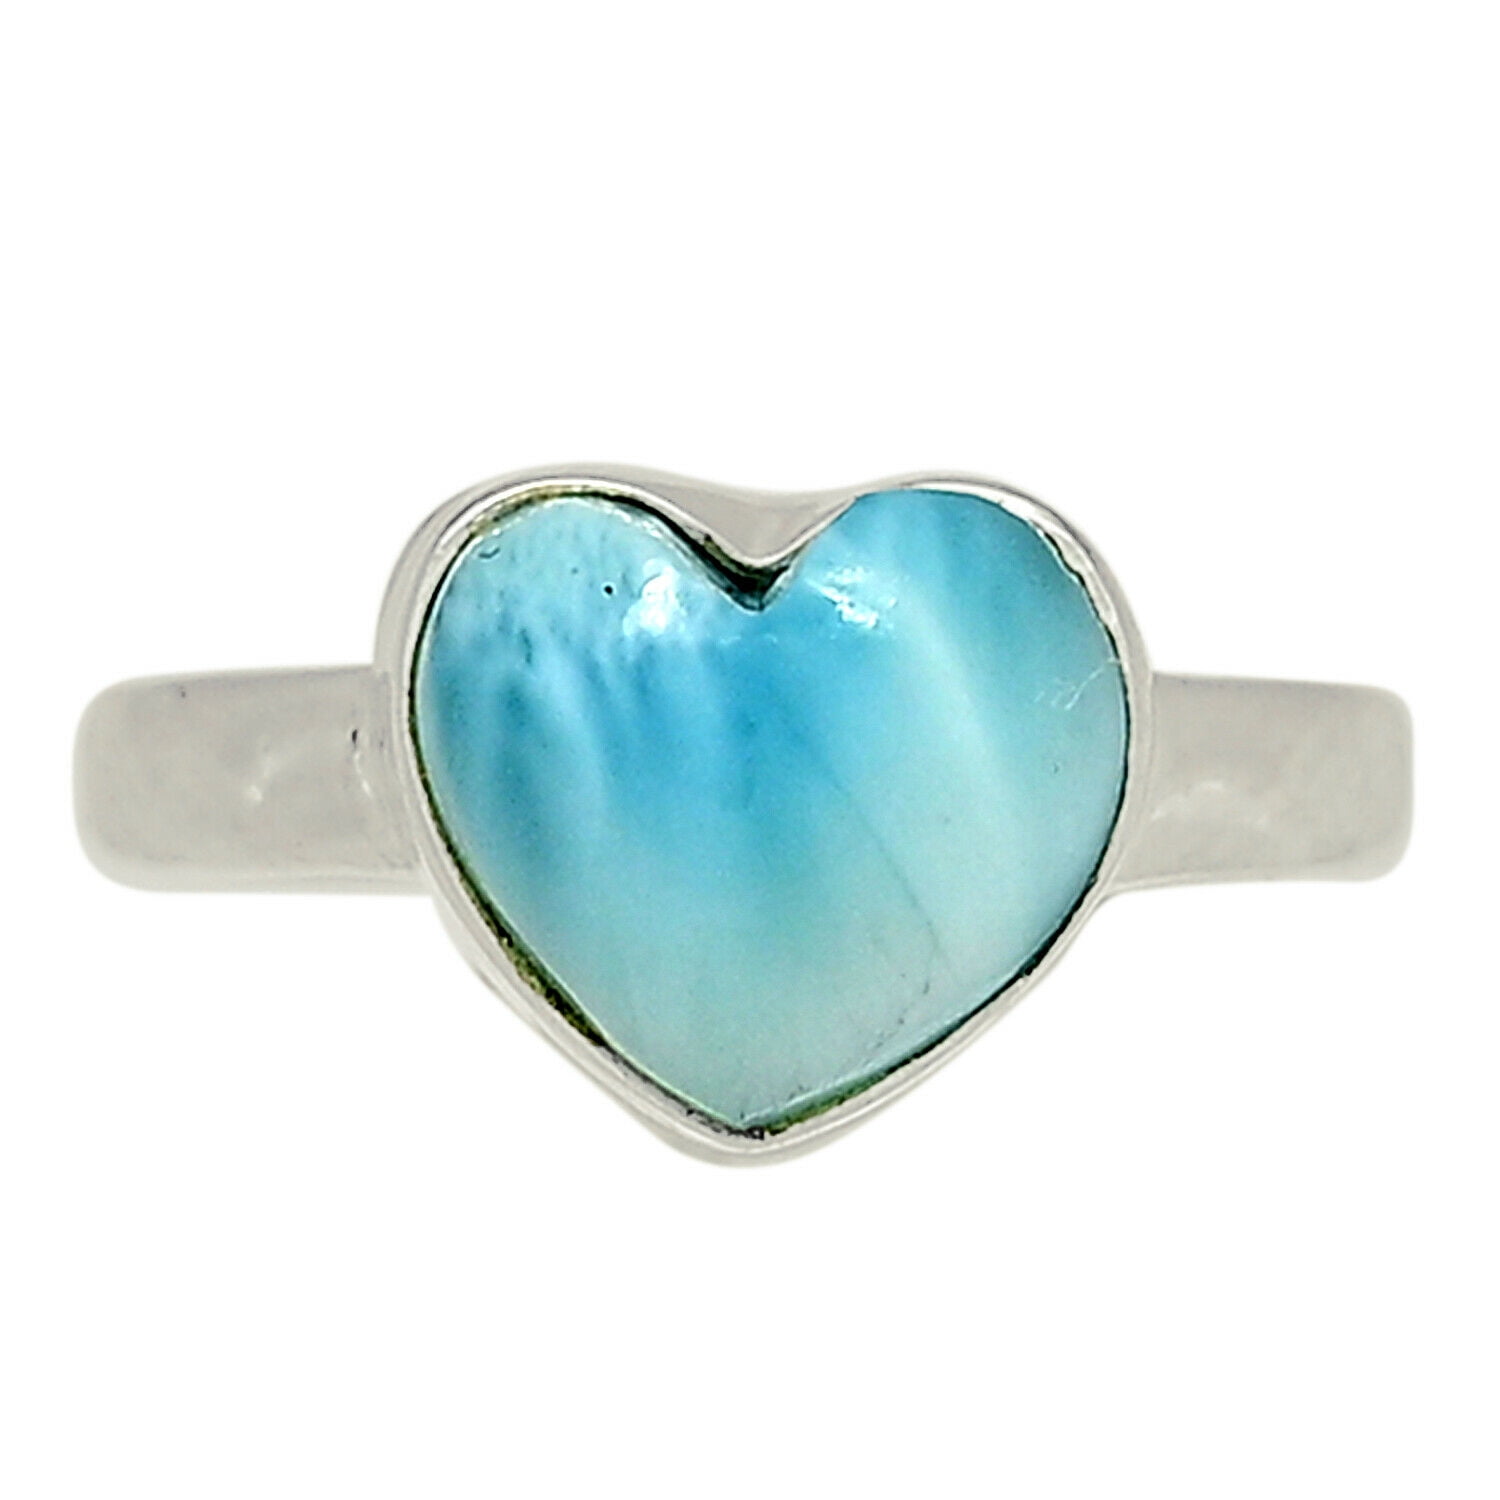 Dominican Republic Larimar Gemstone 925 Sterling Silver Ring Size us 7 